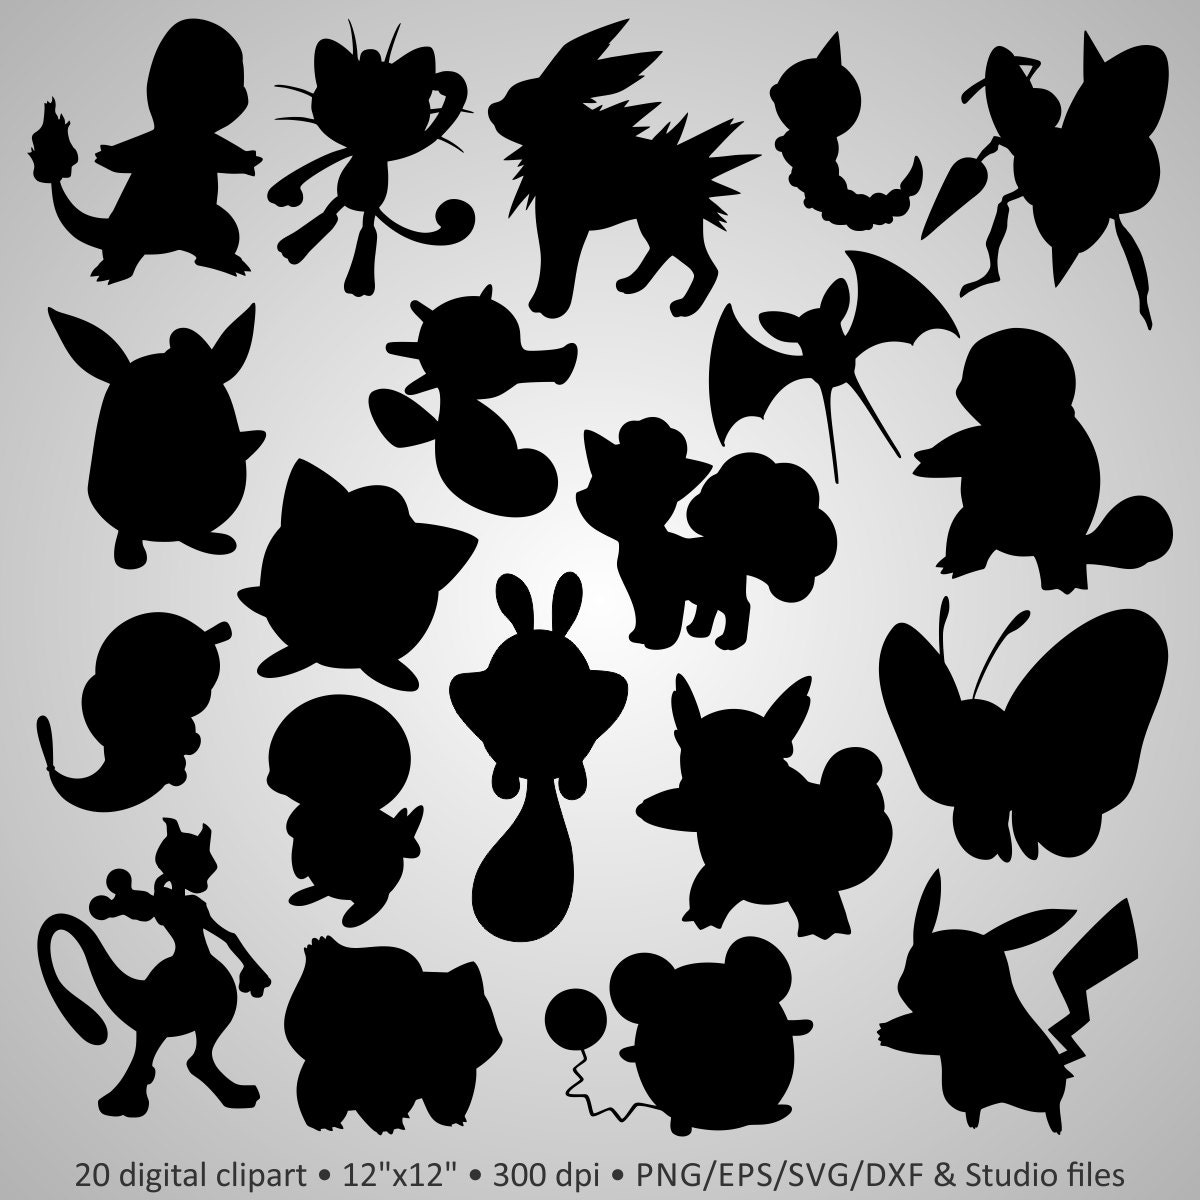 Download Buy 2 Get 1 Free Digital Clipart Pokemon Silhouettes lovely